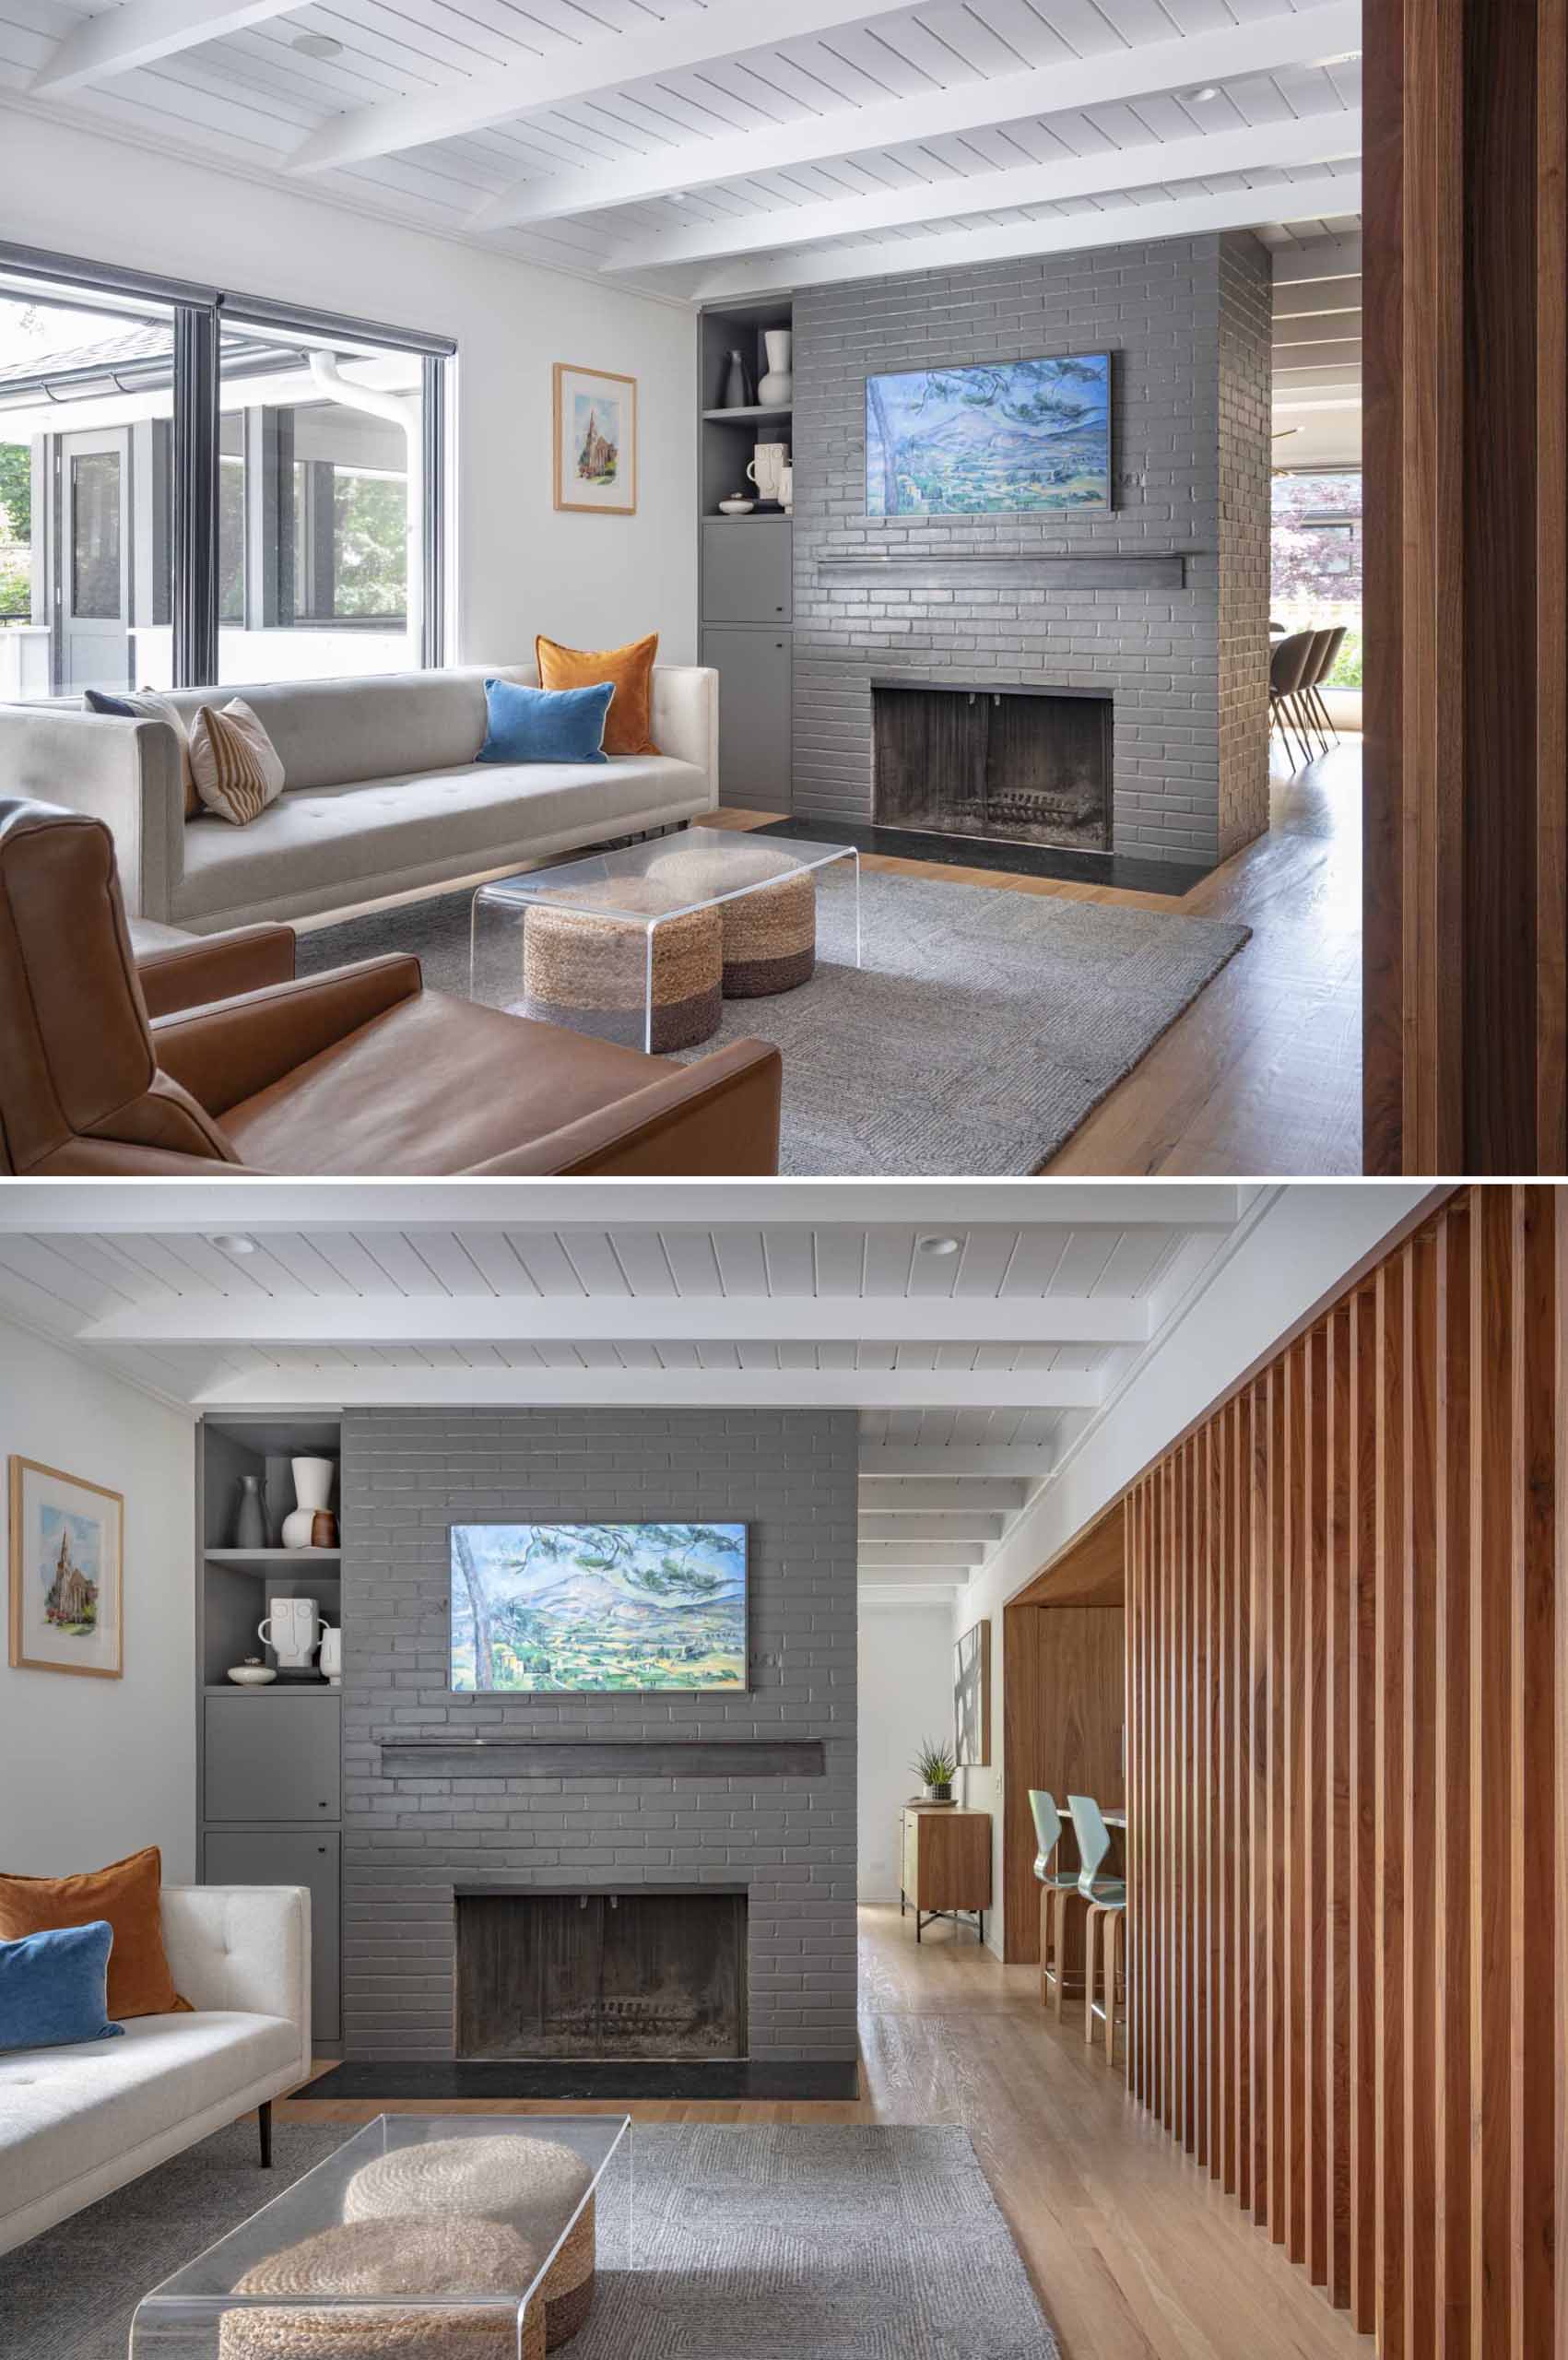 In the living room, stairs were added that lead down to a family room, while the white walls and ceiling, and the grey-painted brick fireplace reflect the colors used on the exterior of the home.